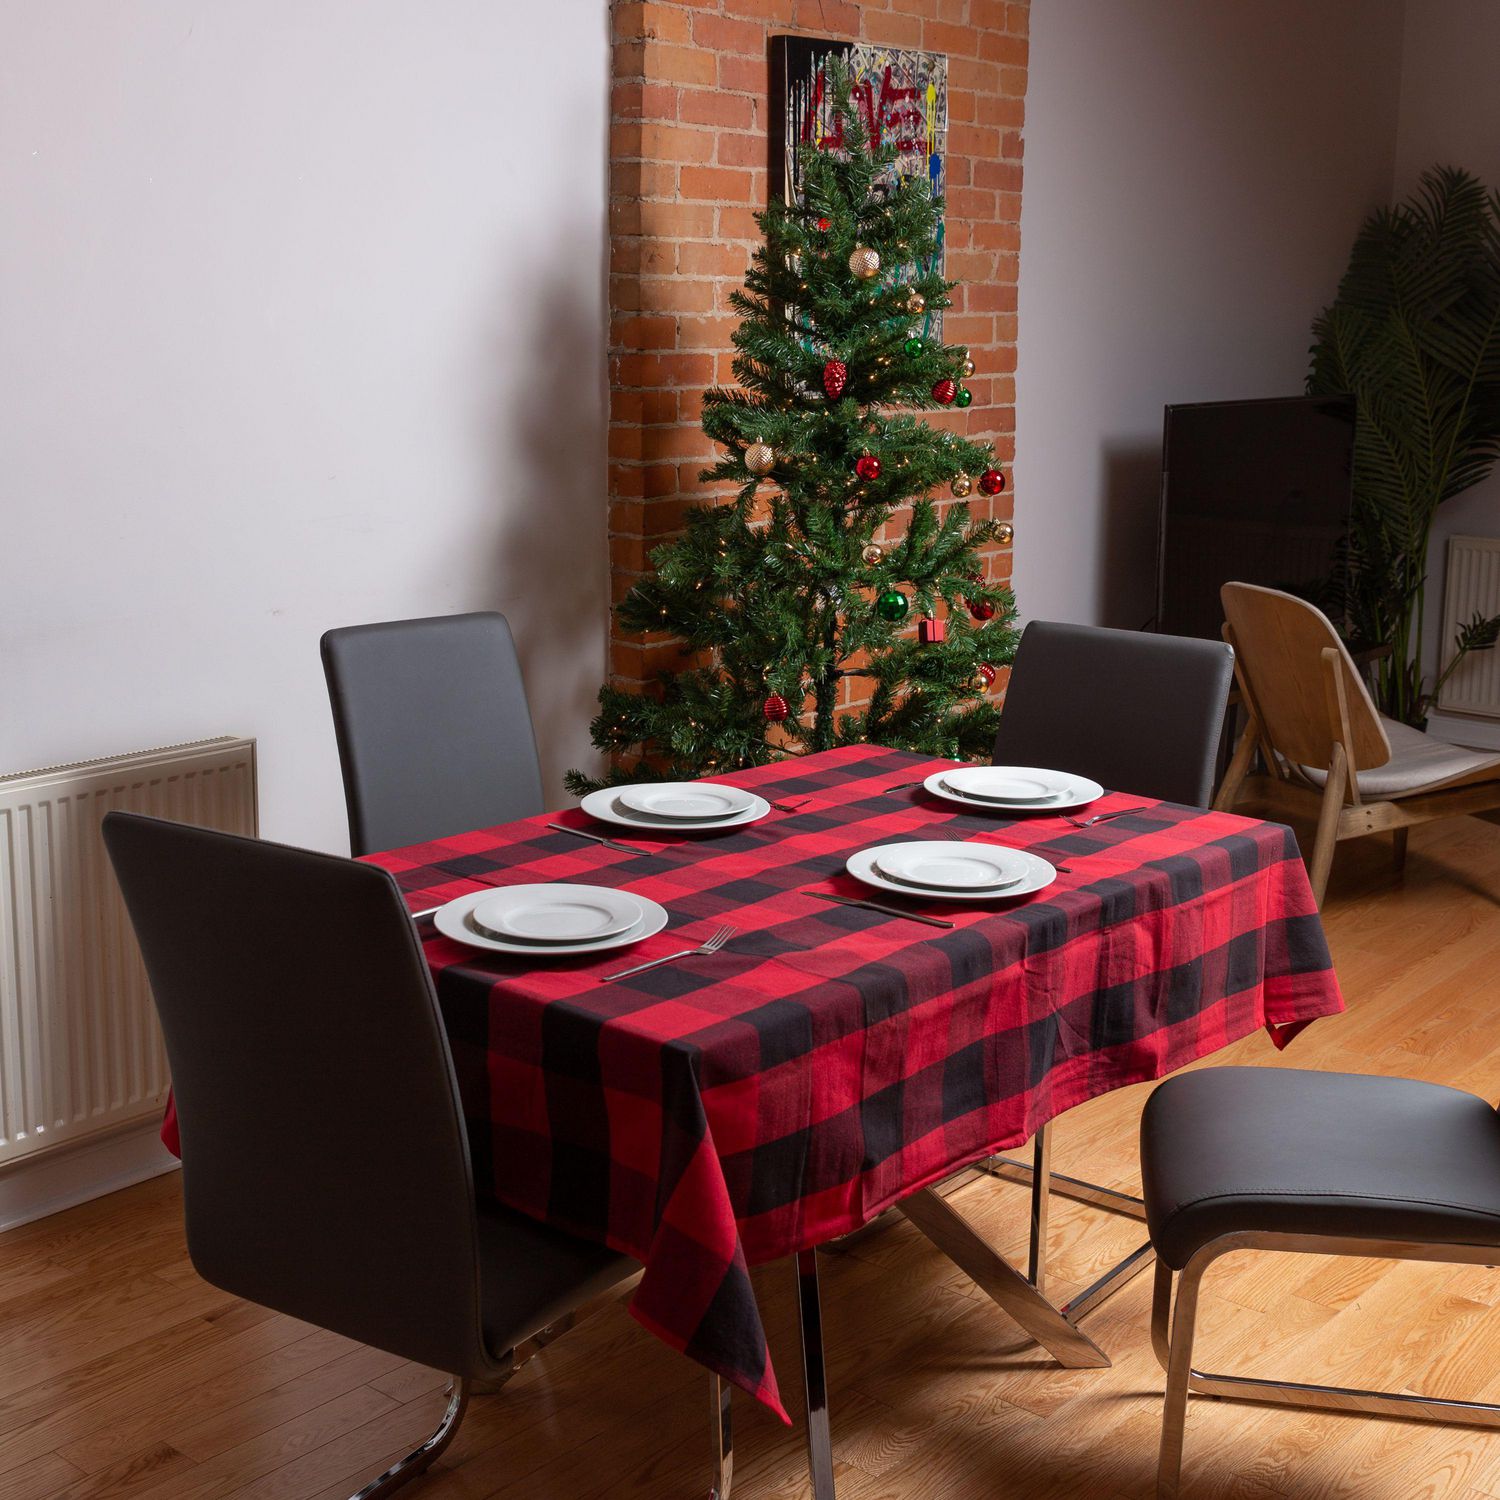 Christmas Rustic Buffalo Plaid Tablecloth 60 Inch x 120 Inch Oblong/Rectangle 100% Cotton Lintex Red and Black Buffalo Holiday Cottage Check Fabric Tablecloth